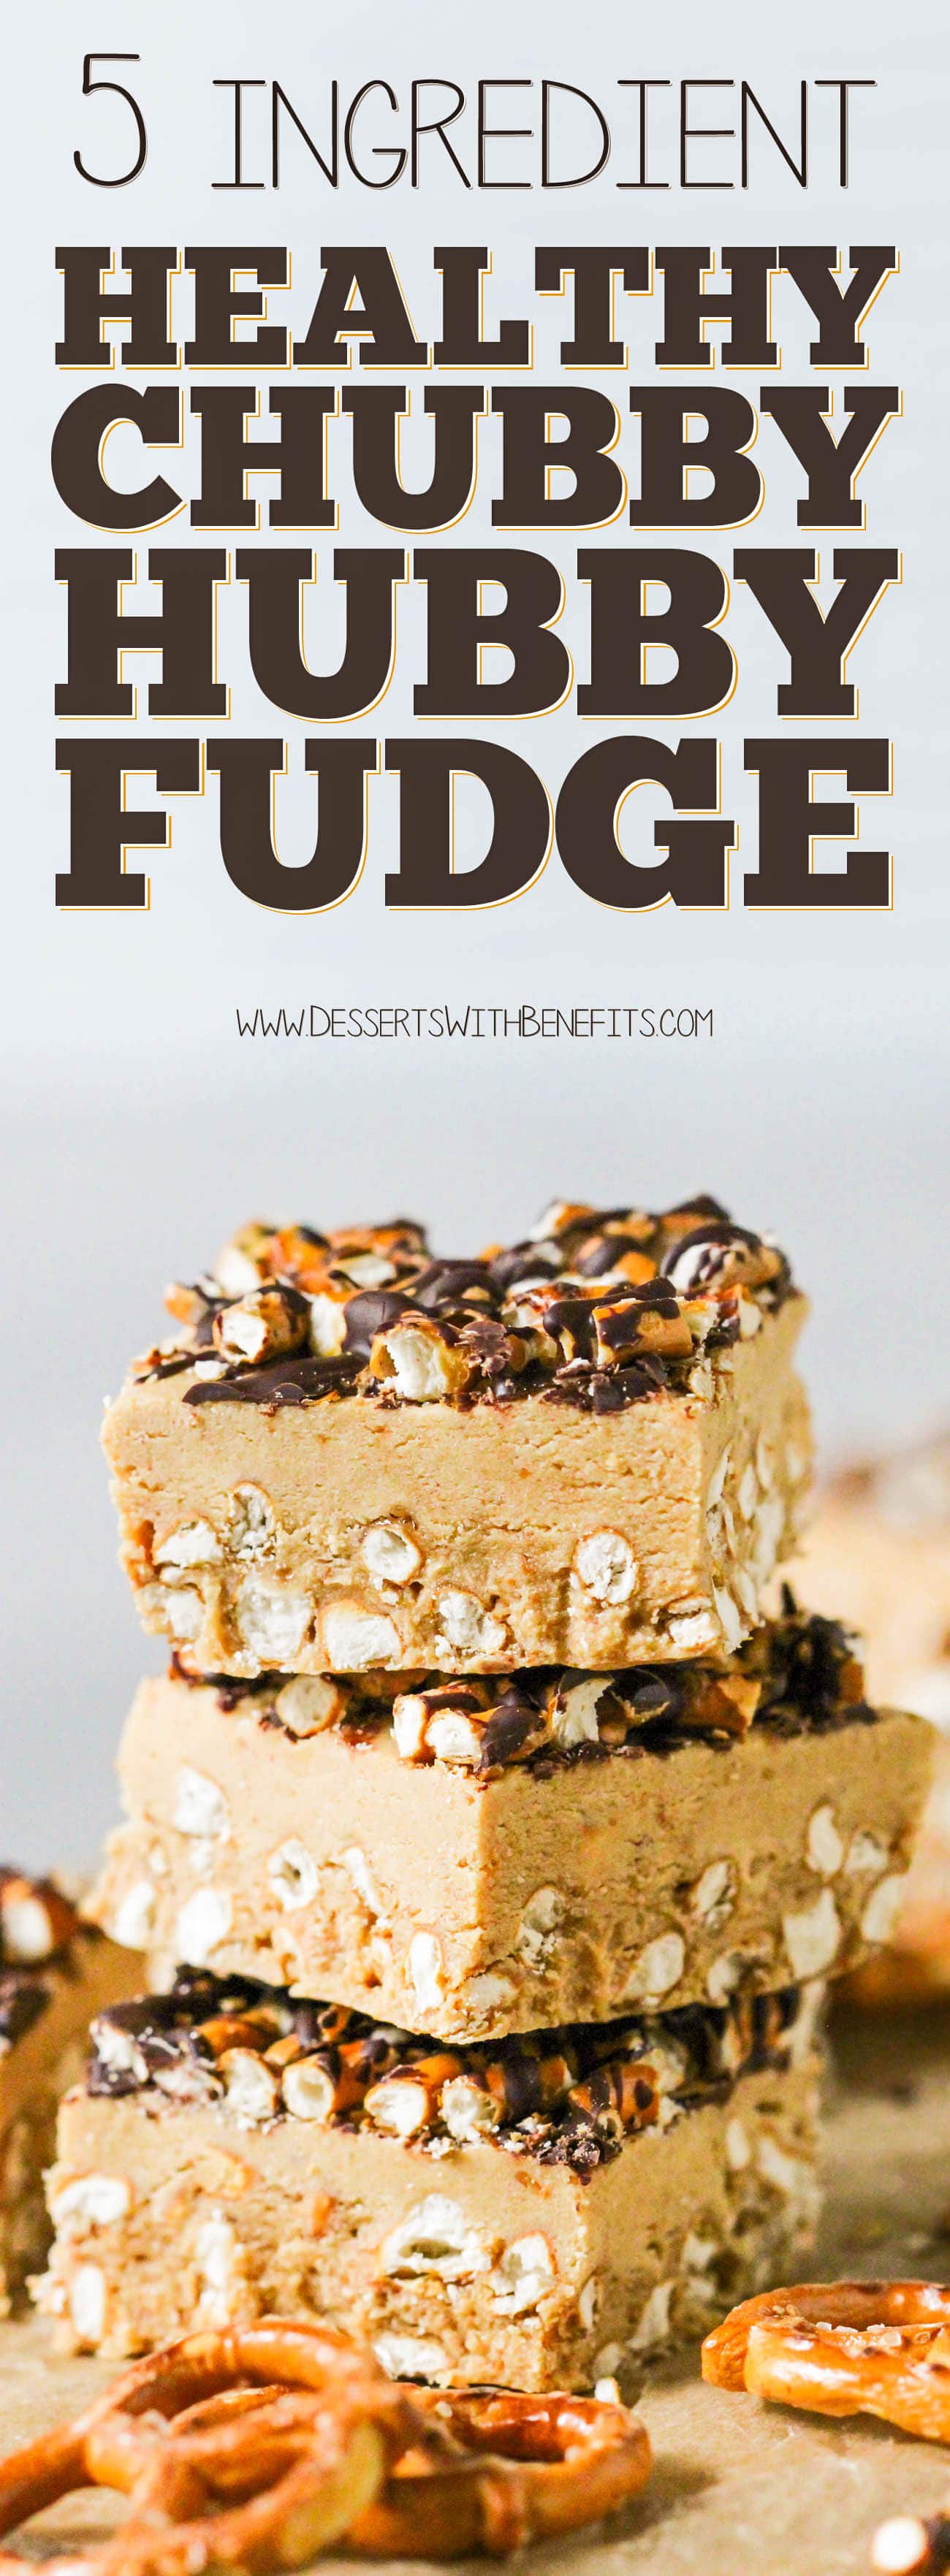 Healthy Chubby Hubby Fudge (Chocolate Peanut Butter Pretzel Fudge) -- refined sugar free, high protein, and gluten free optional.